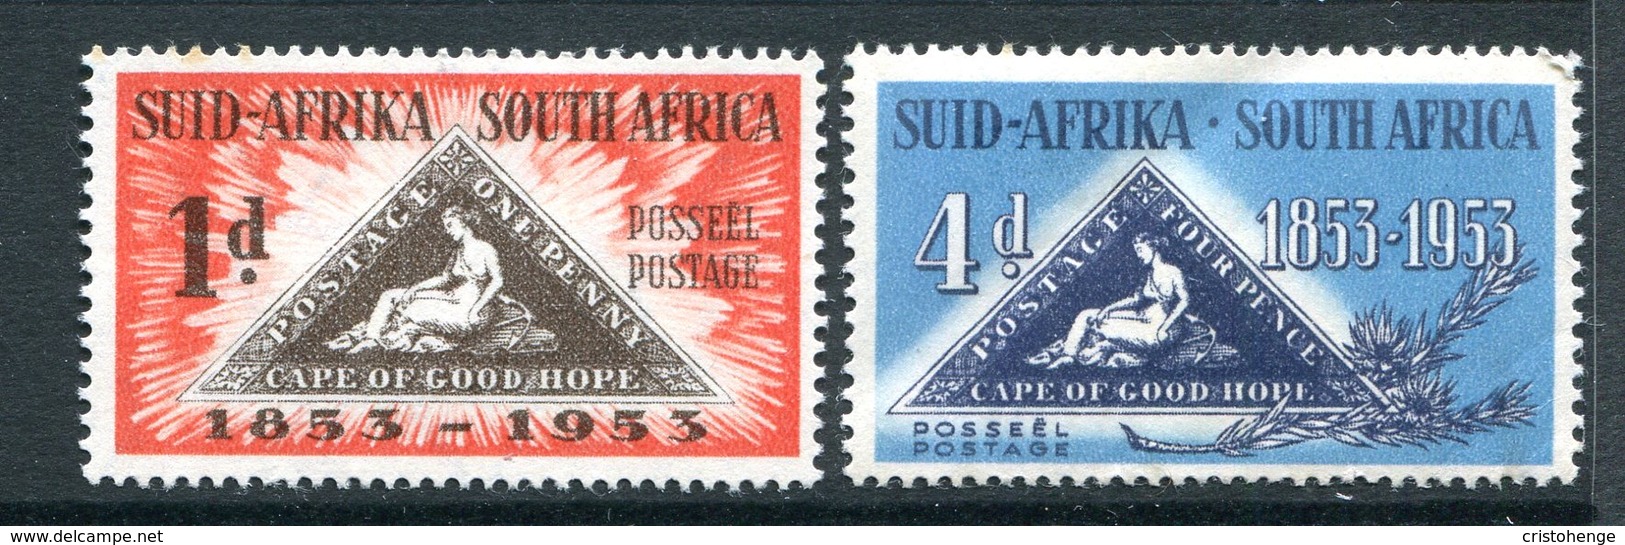 South Africa 1953 Centenary Of First Cape Of Good Hope Stamps Set HM (SG 144-145) - Unused Stamps